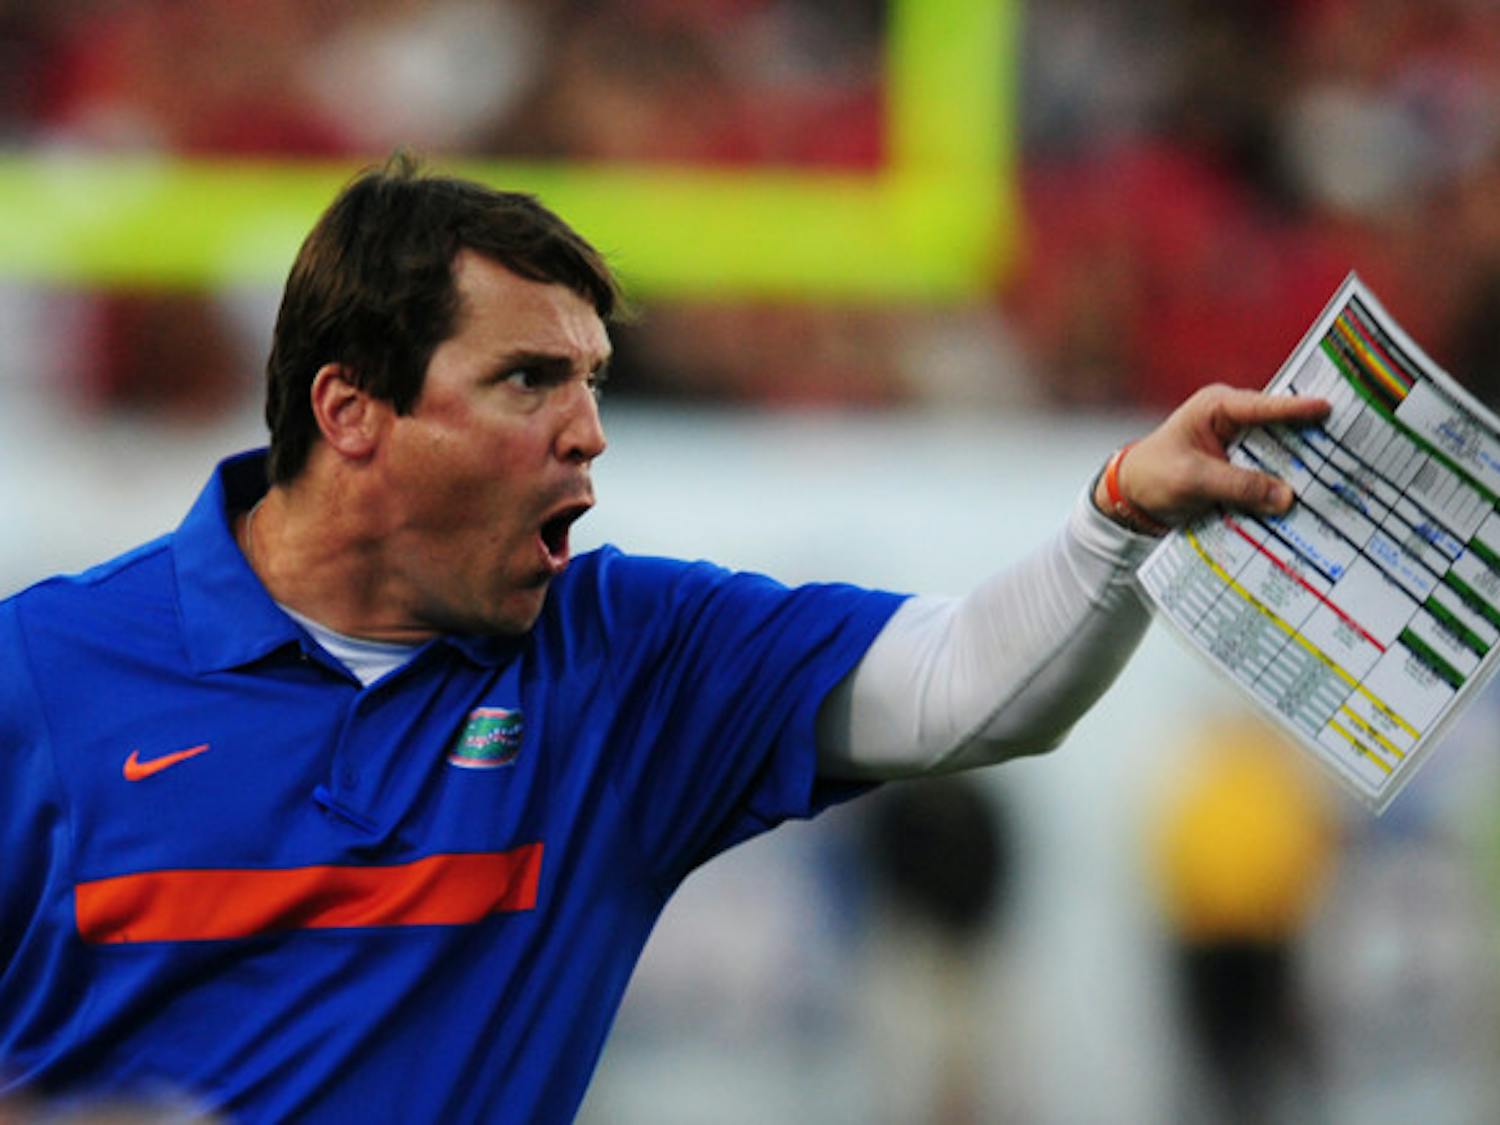 Coach Will Muschamp reacts to a pass interference penalty during the second half of Florida’s 24-20 loss to Georgia on Oct. 29, 2011. The Gators have a chance to avenge last year's loss against the Bulldogs on Saturday in Jacksonville.
&nbsp;